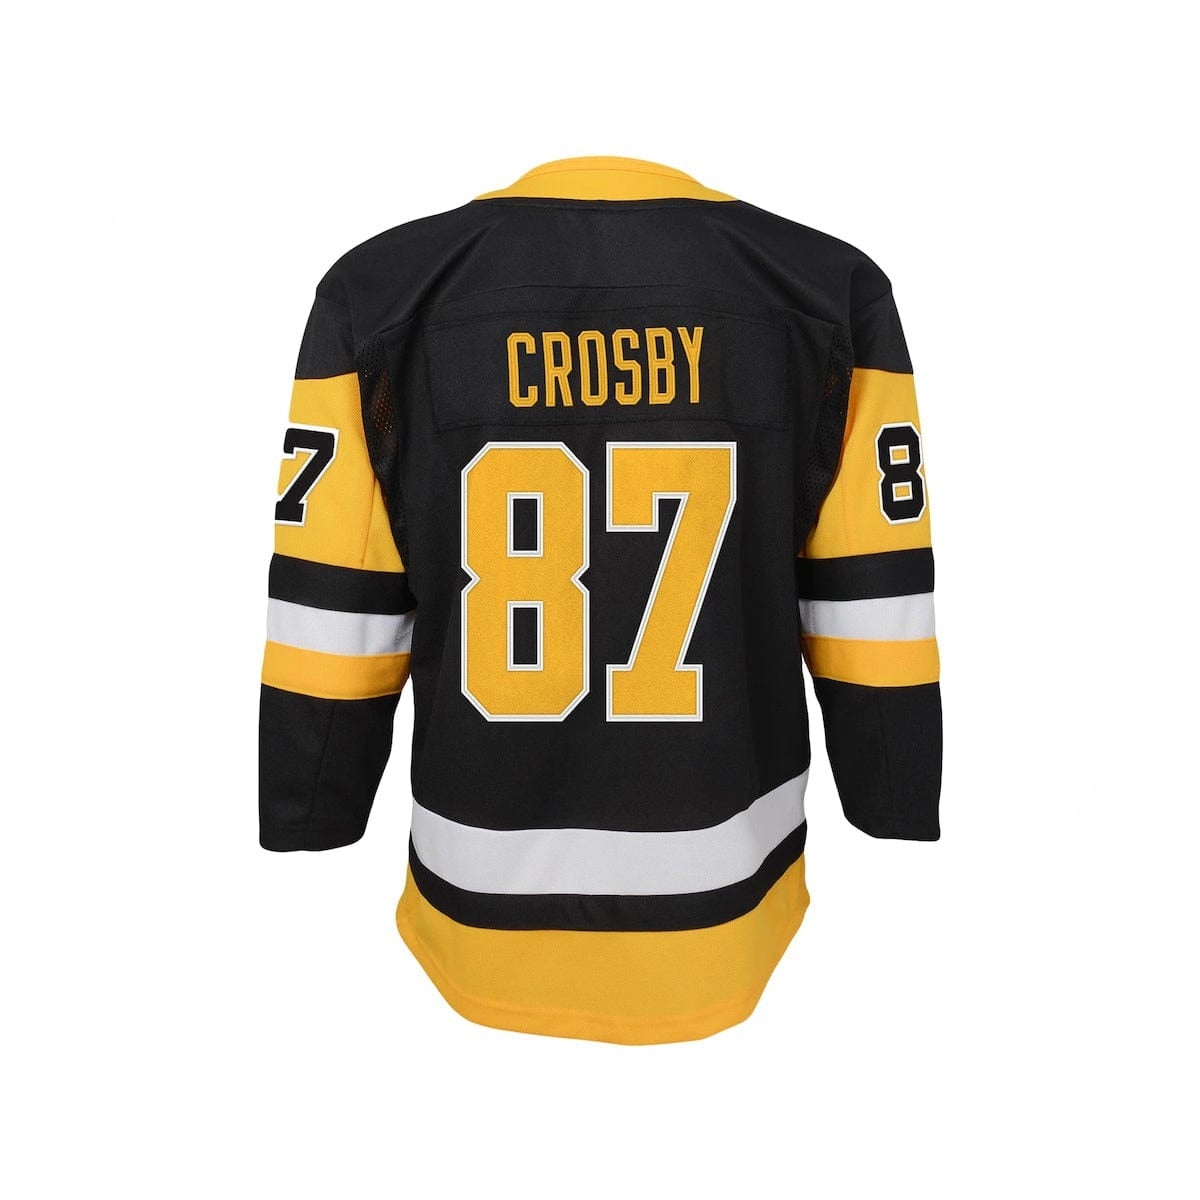 Pittsburgh Penguins Home Outer Stuff Premier Youth Jersey - Sidney Crosby